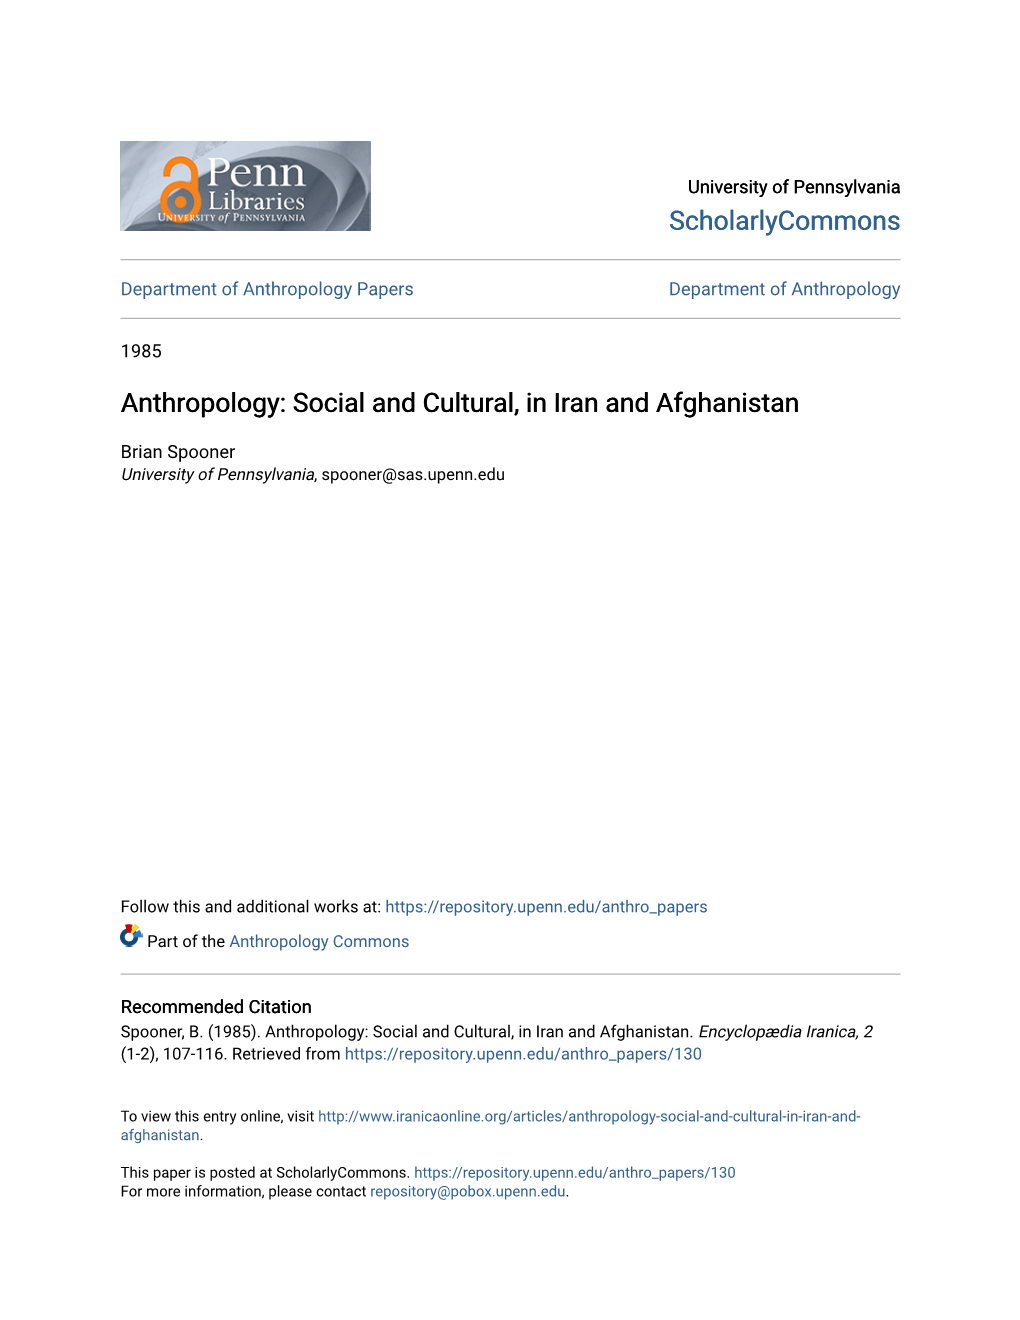 Anthropology: Social and Cultural, in Iran and Afghanistan